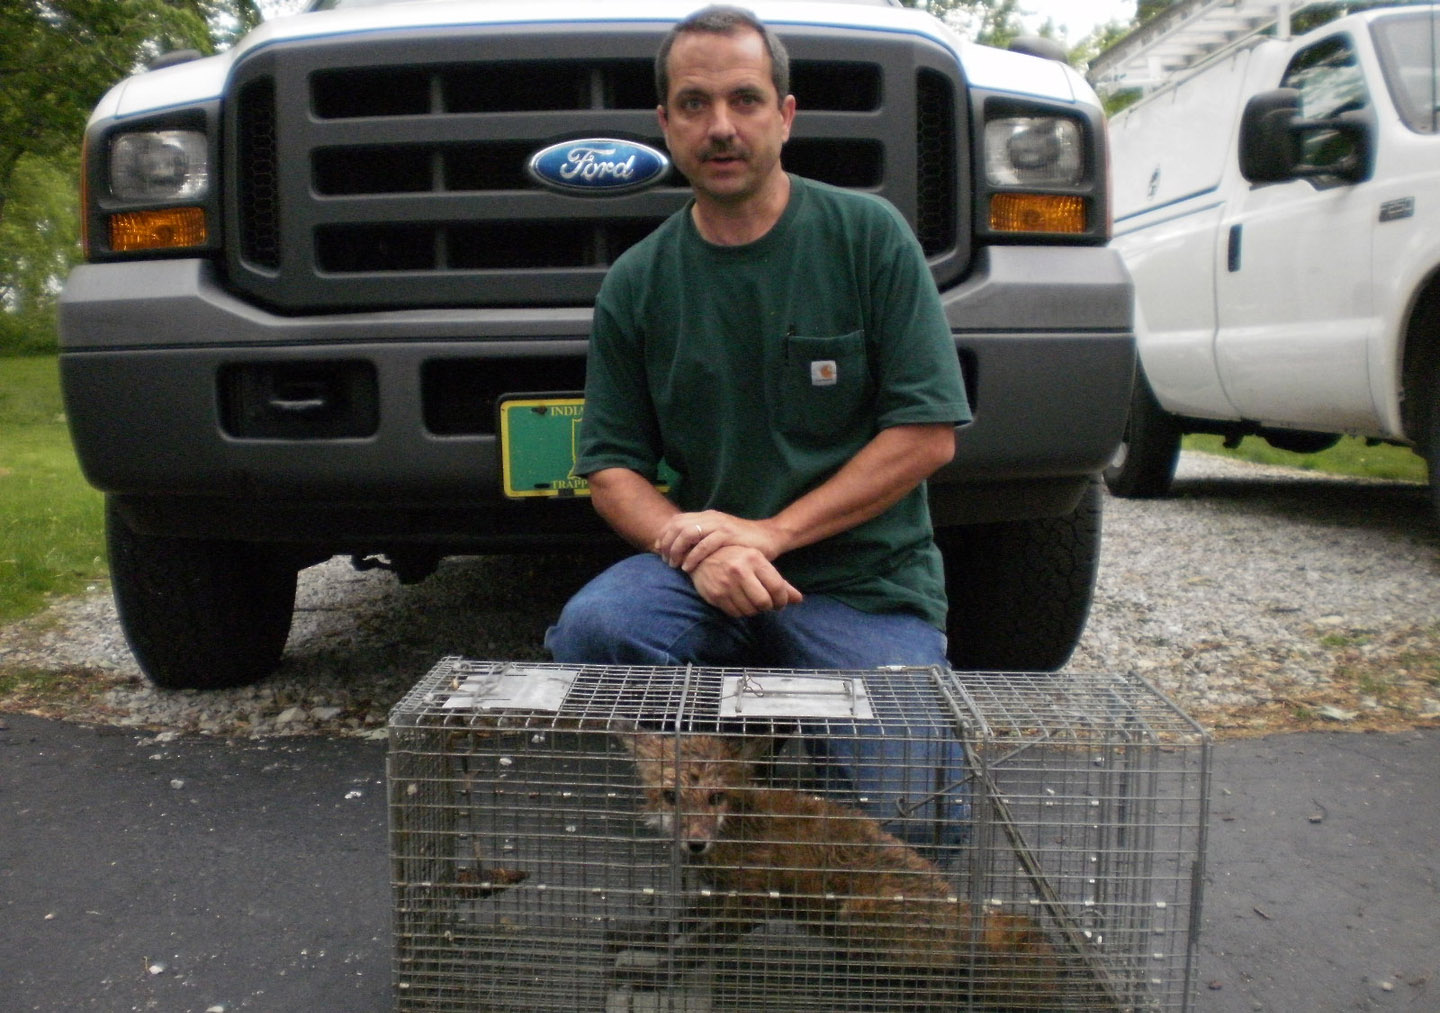 Kirk Neuner With Trapped Fox